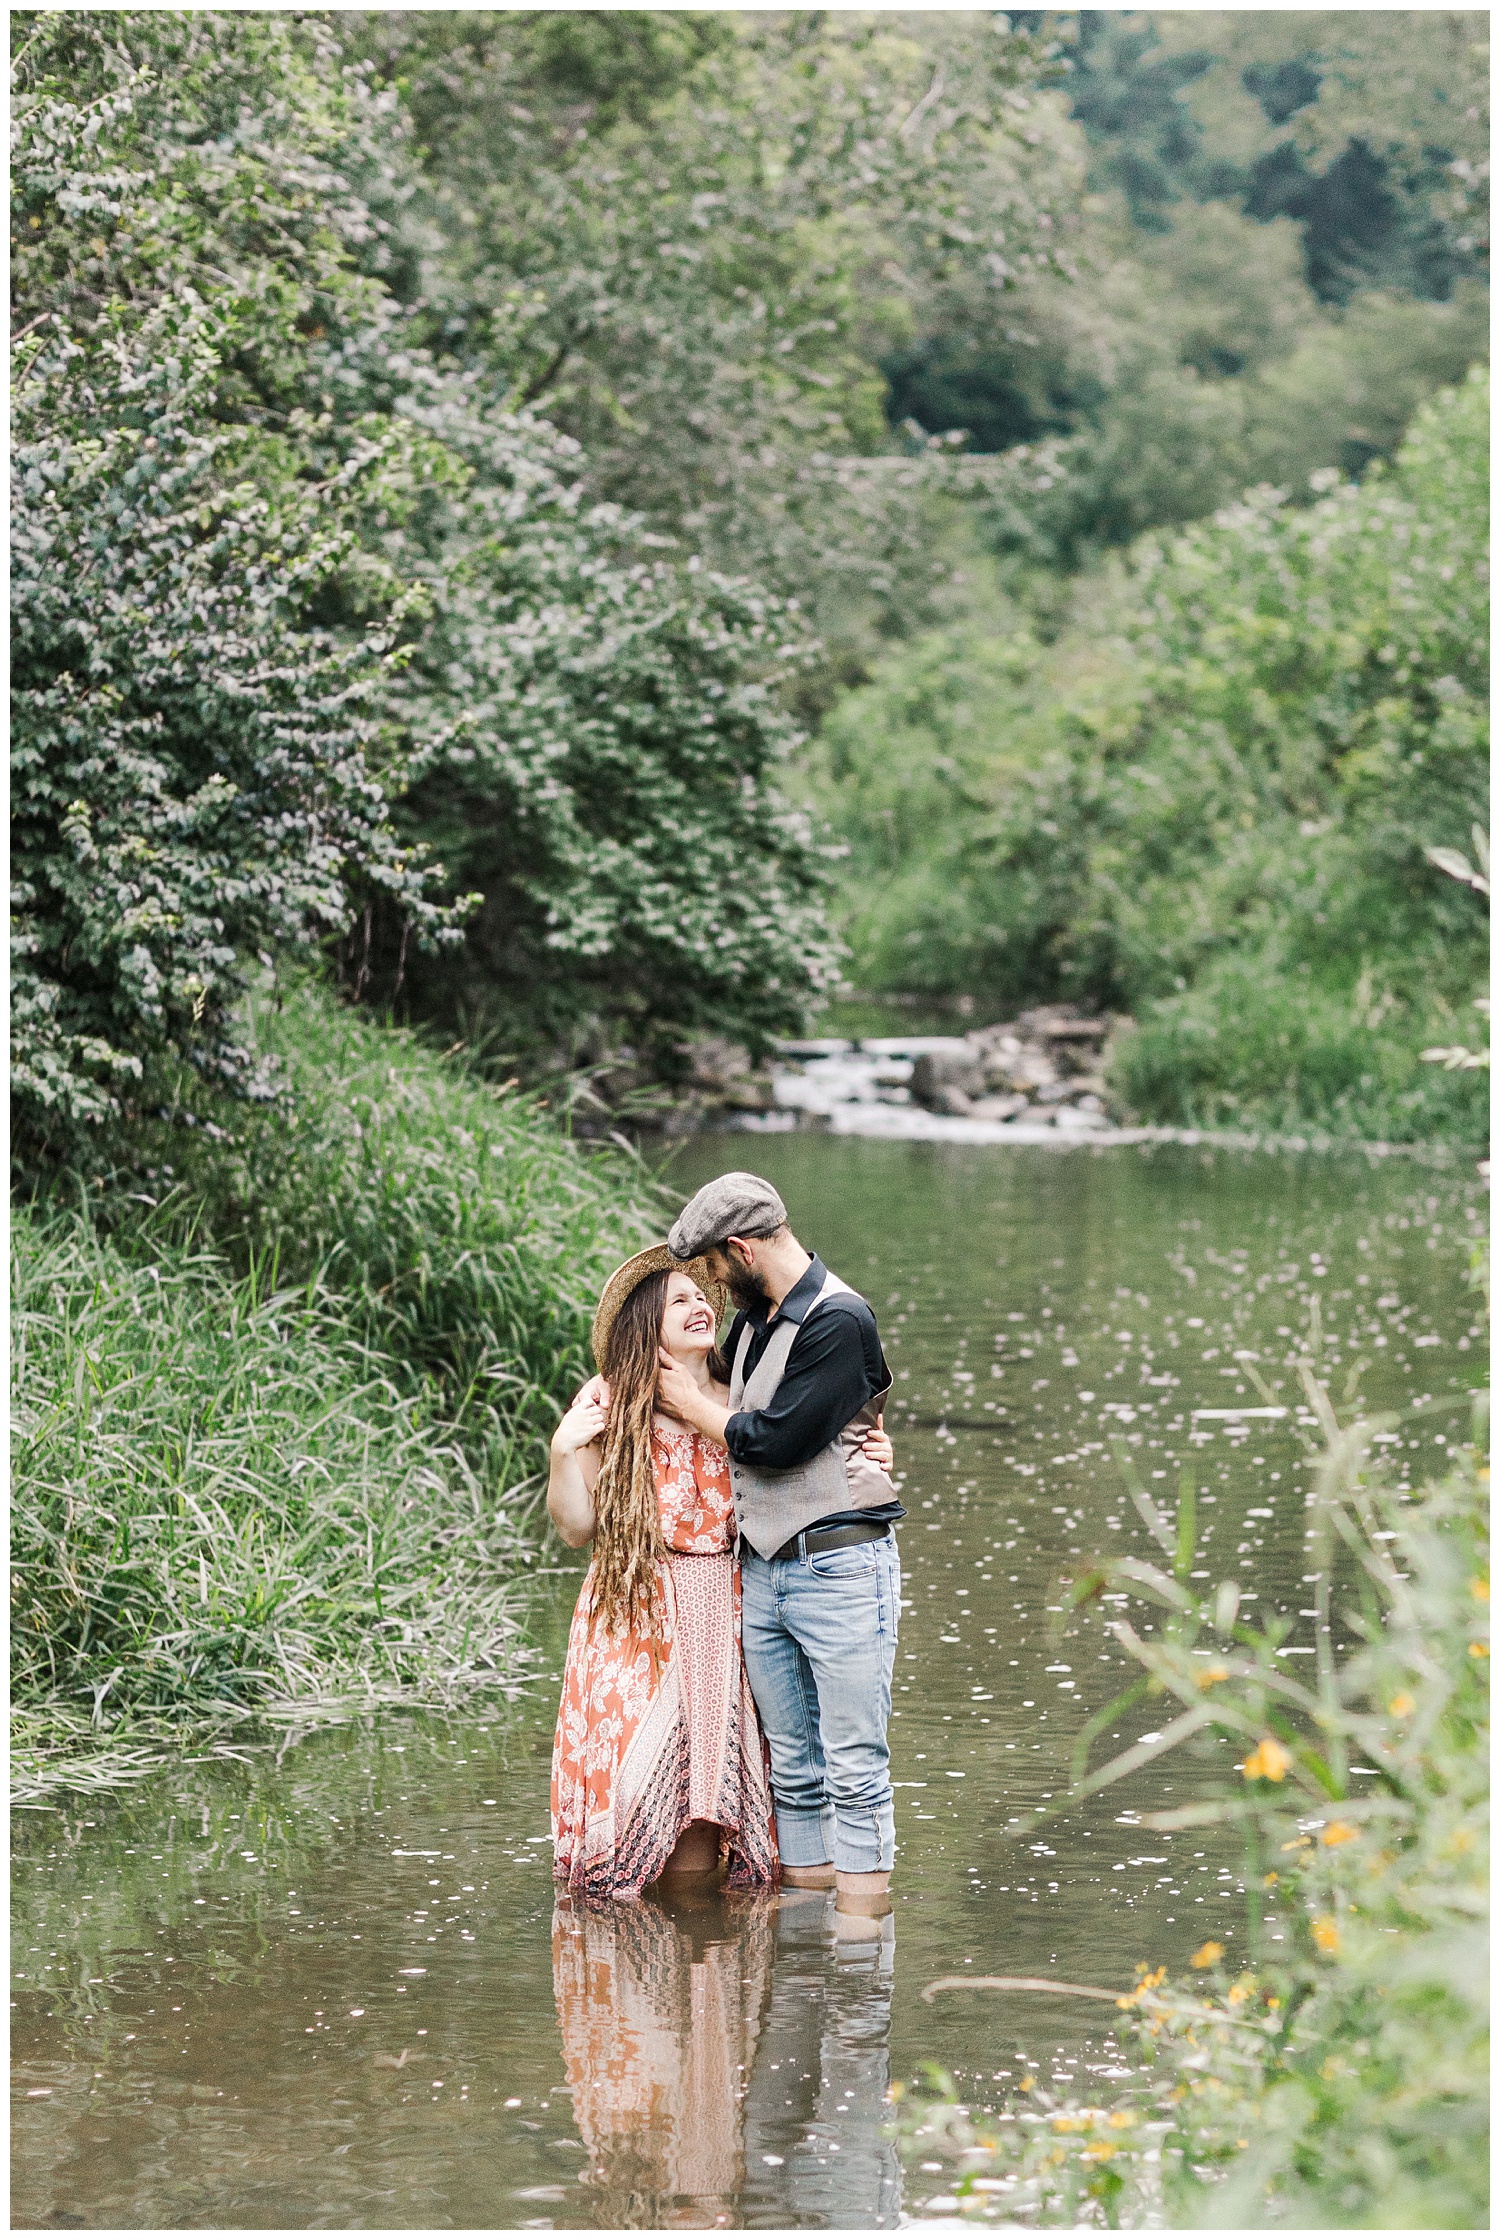 Katlyn and Brad nuzzle in close in the middle of a stream at Thomas Mitchell Park | CB Studio